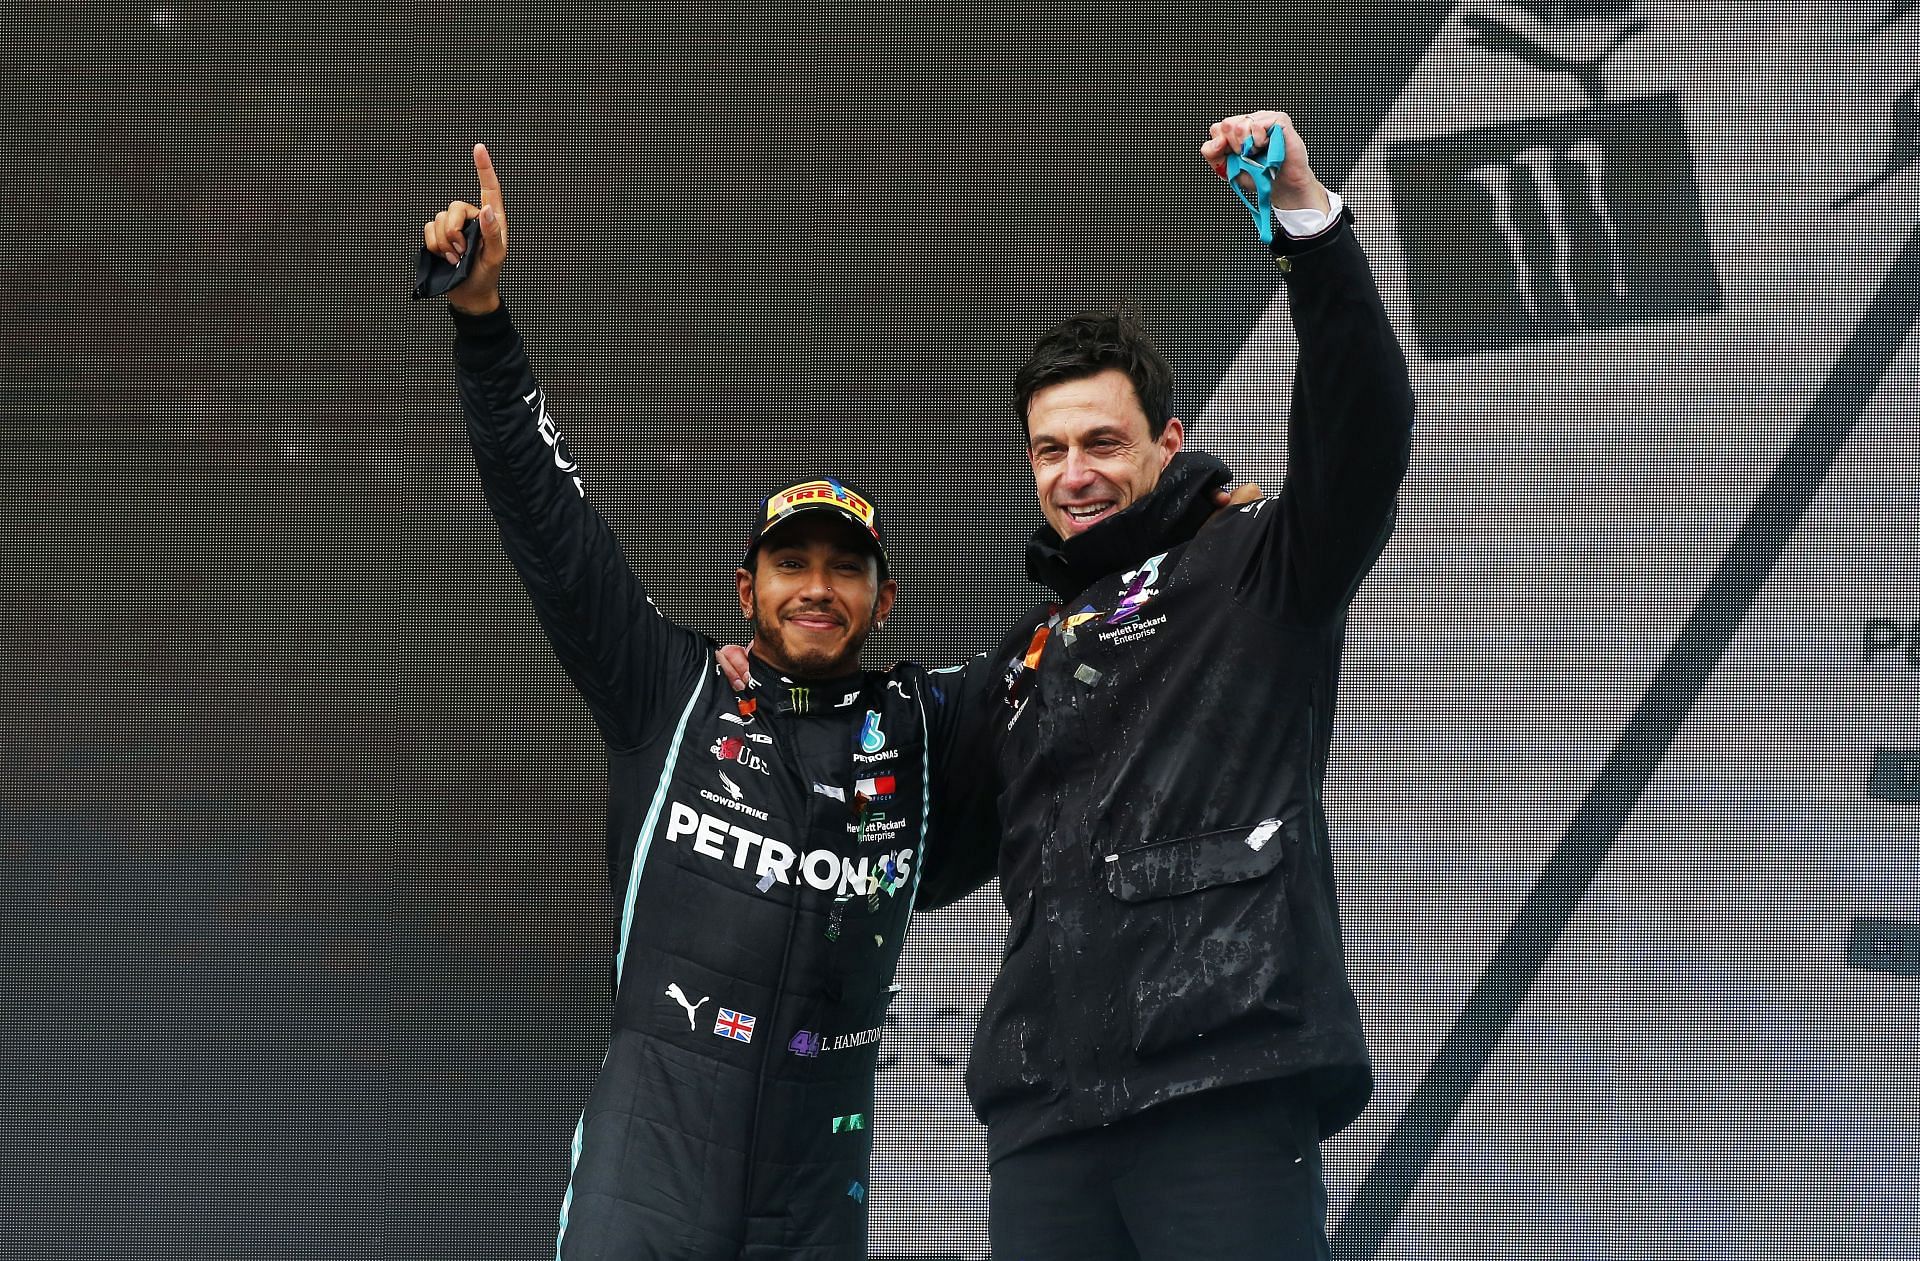 Lewis Hamilton and Toto Wolff on the podium at the Turkish GP 2020 (Photo by Kenan Asyali - Pool/Getty Images)